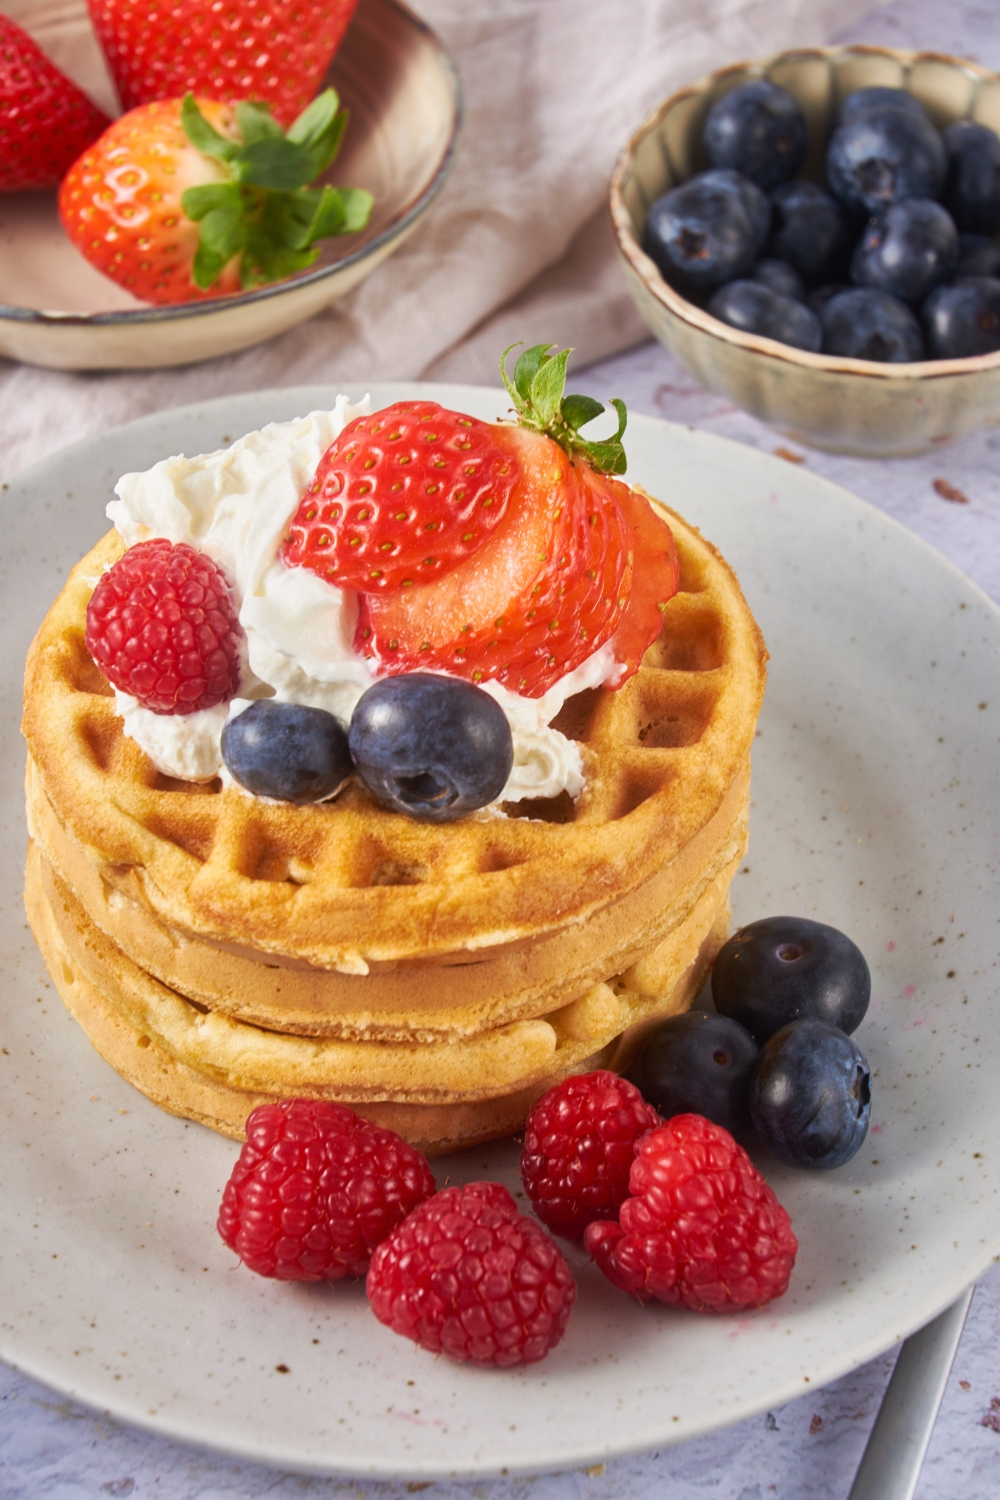 A stack of waffles topped with whipped cream and fresh berries, with some berries spilled out on the plate next to the waffles.